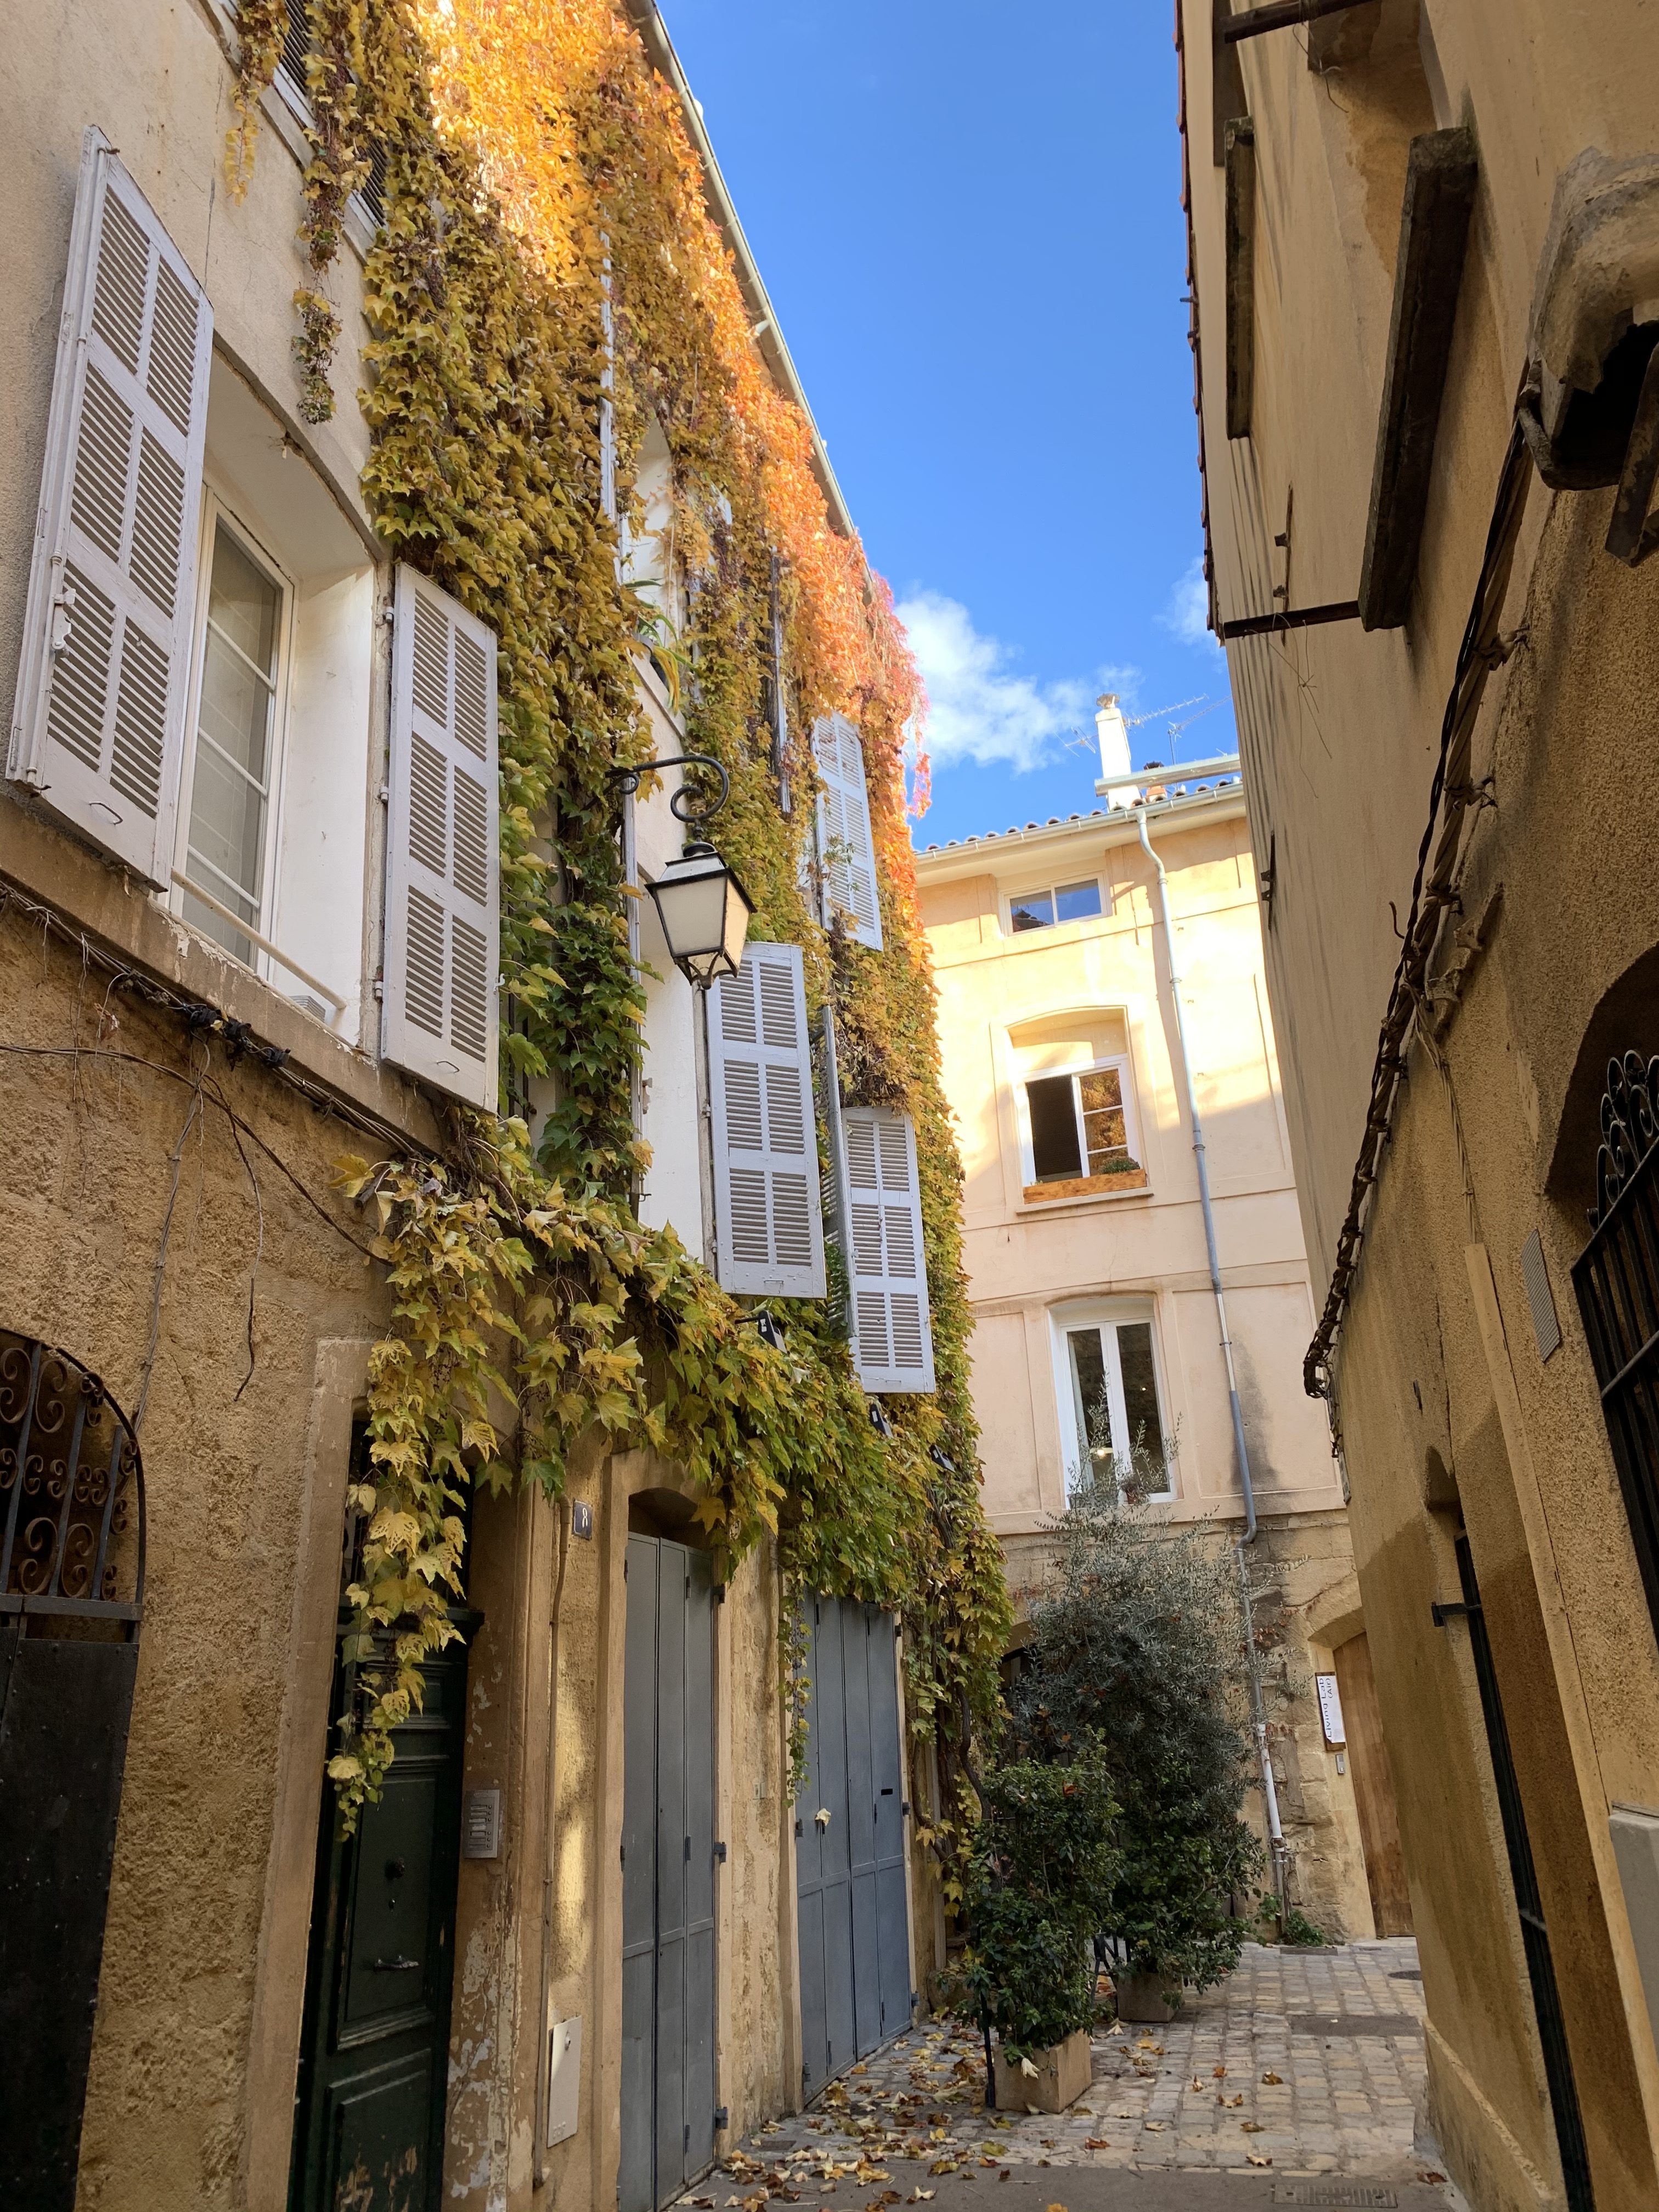 A narrow street in Aix, France, with windows lined with greenery